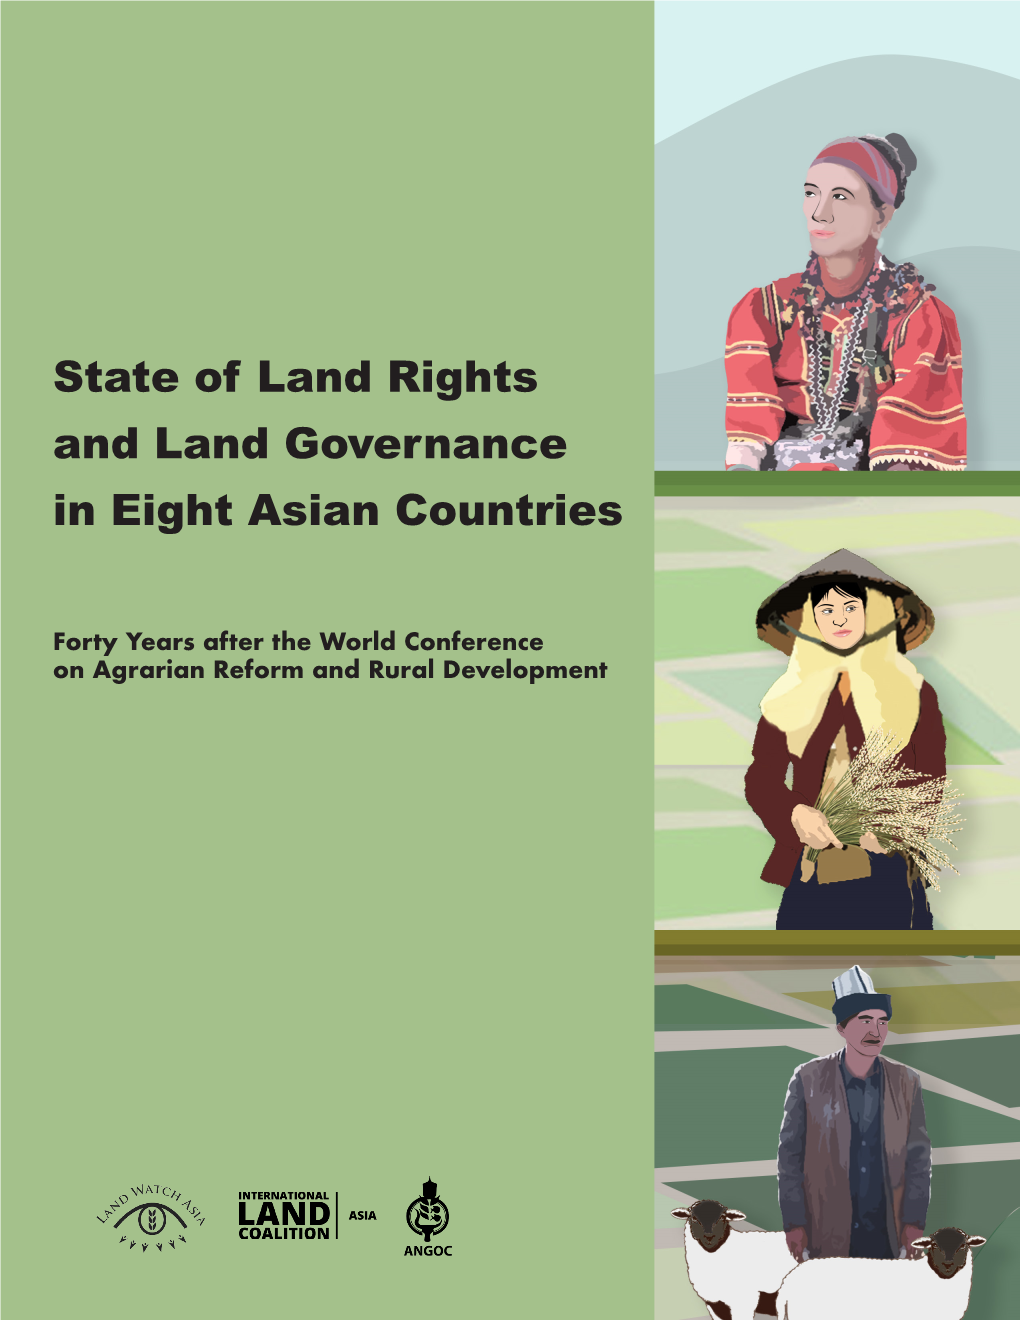 State of Land Rights and Land Governance in Eight Asian Countries